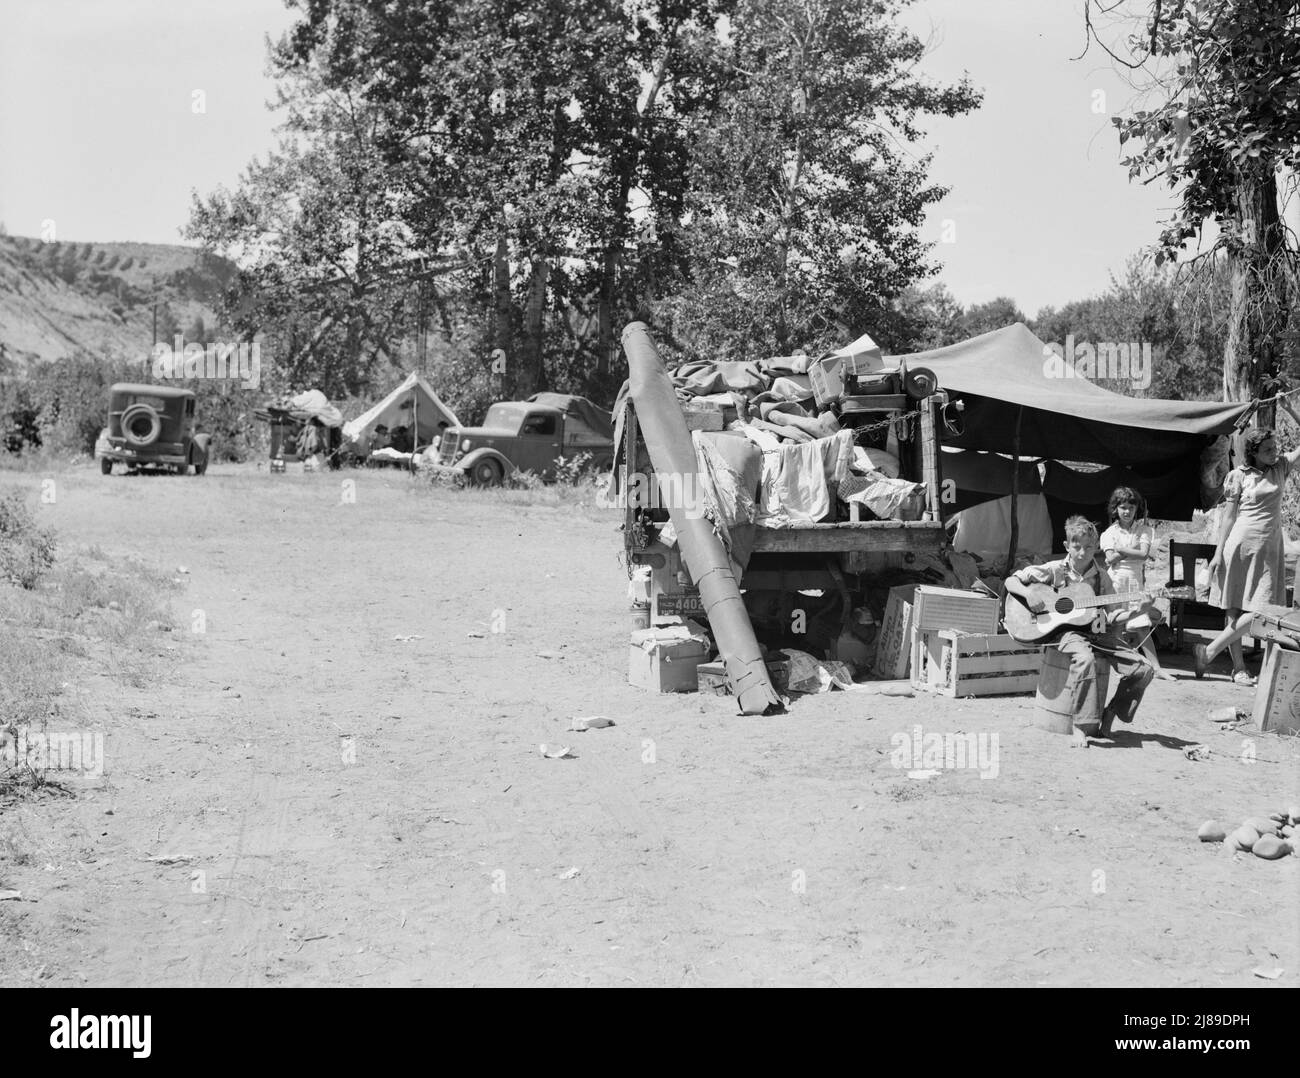 [Untitled, possibly related to: Washington, Yakima Valley. Camp of migratory families in &quot;Ramblers Park.&quot;]. Stock Photo